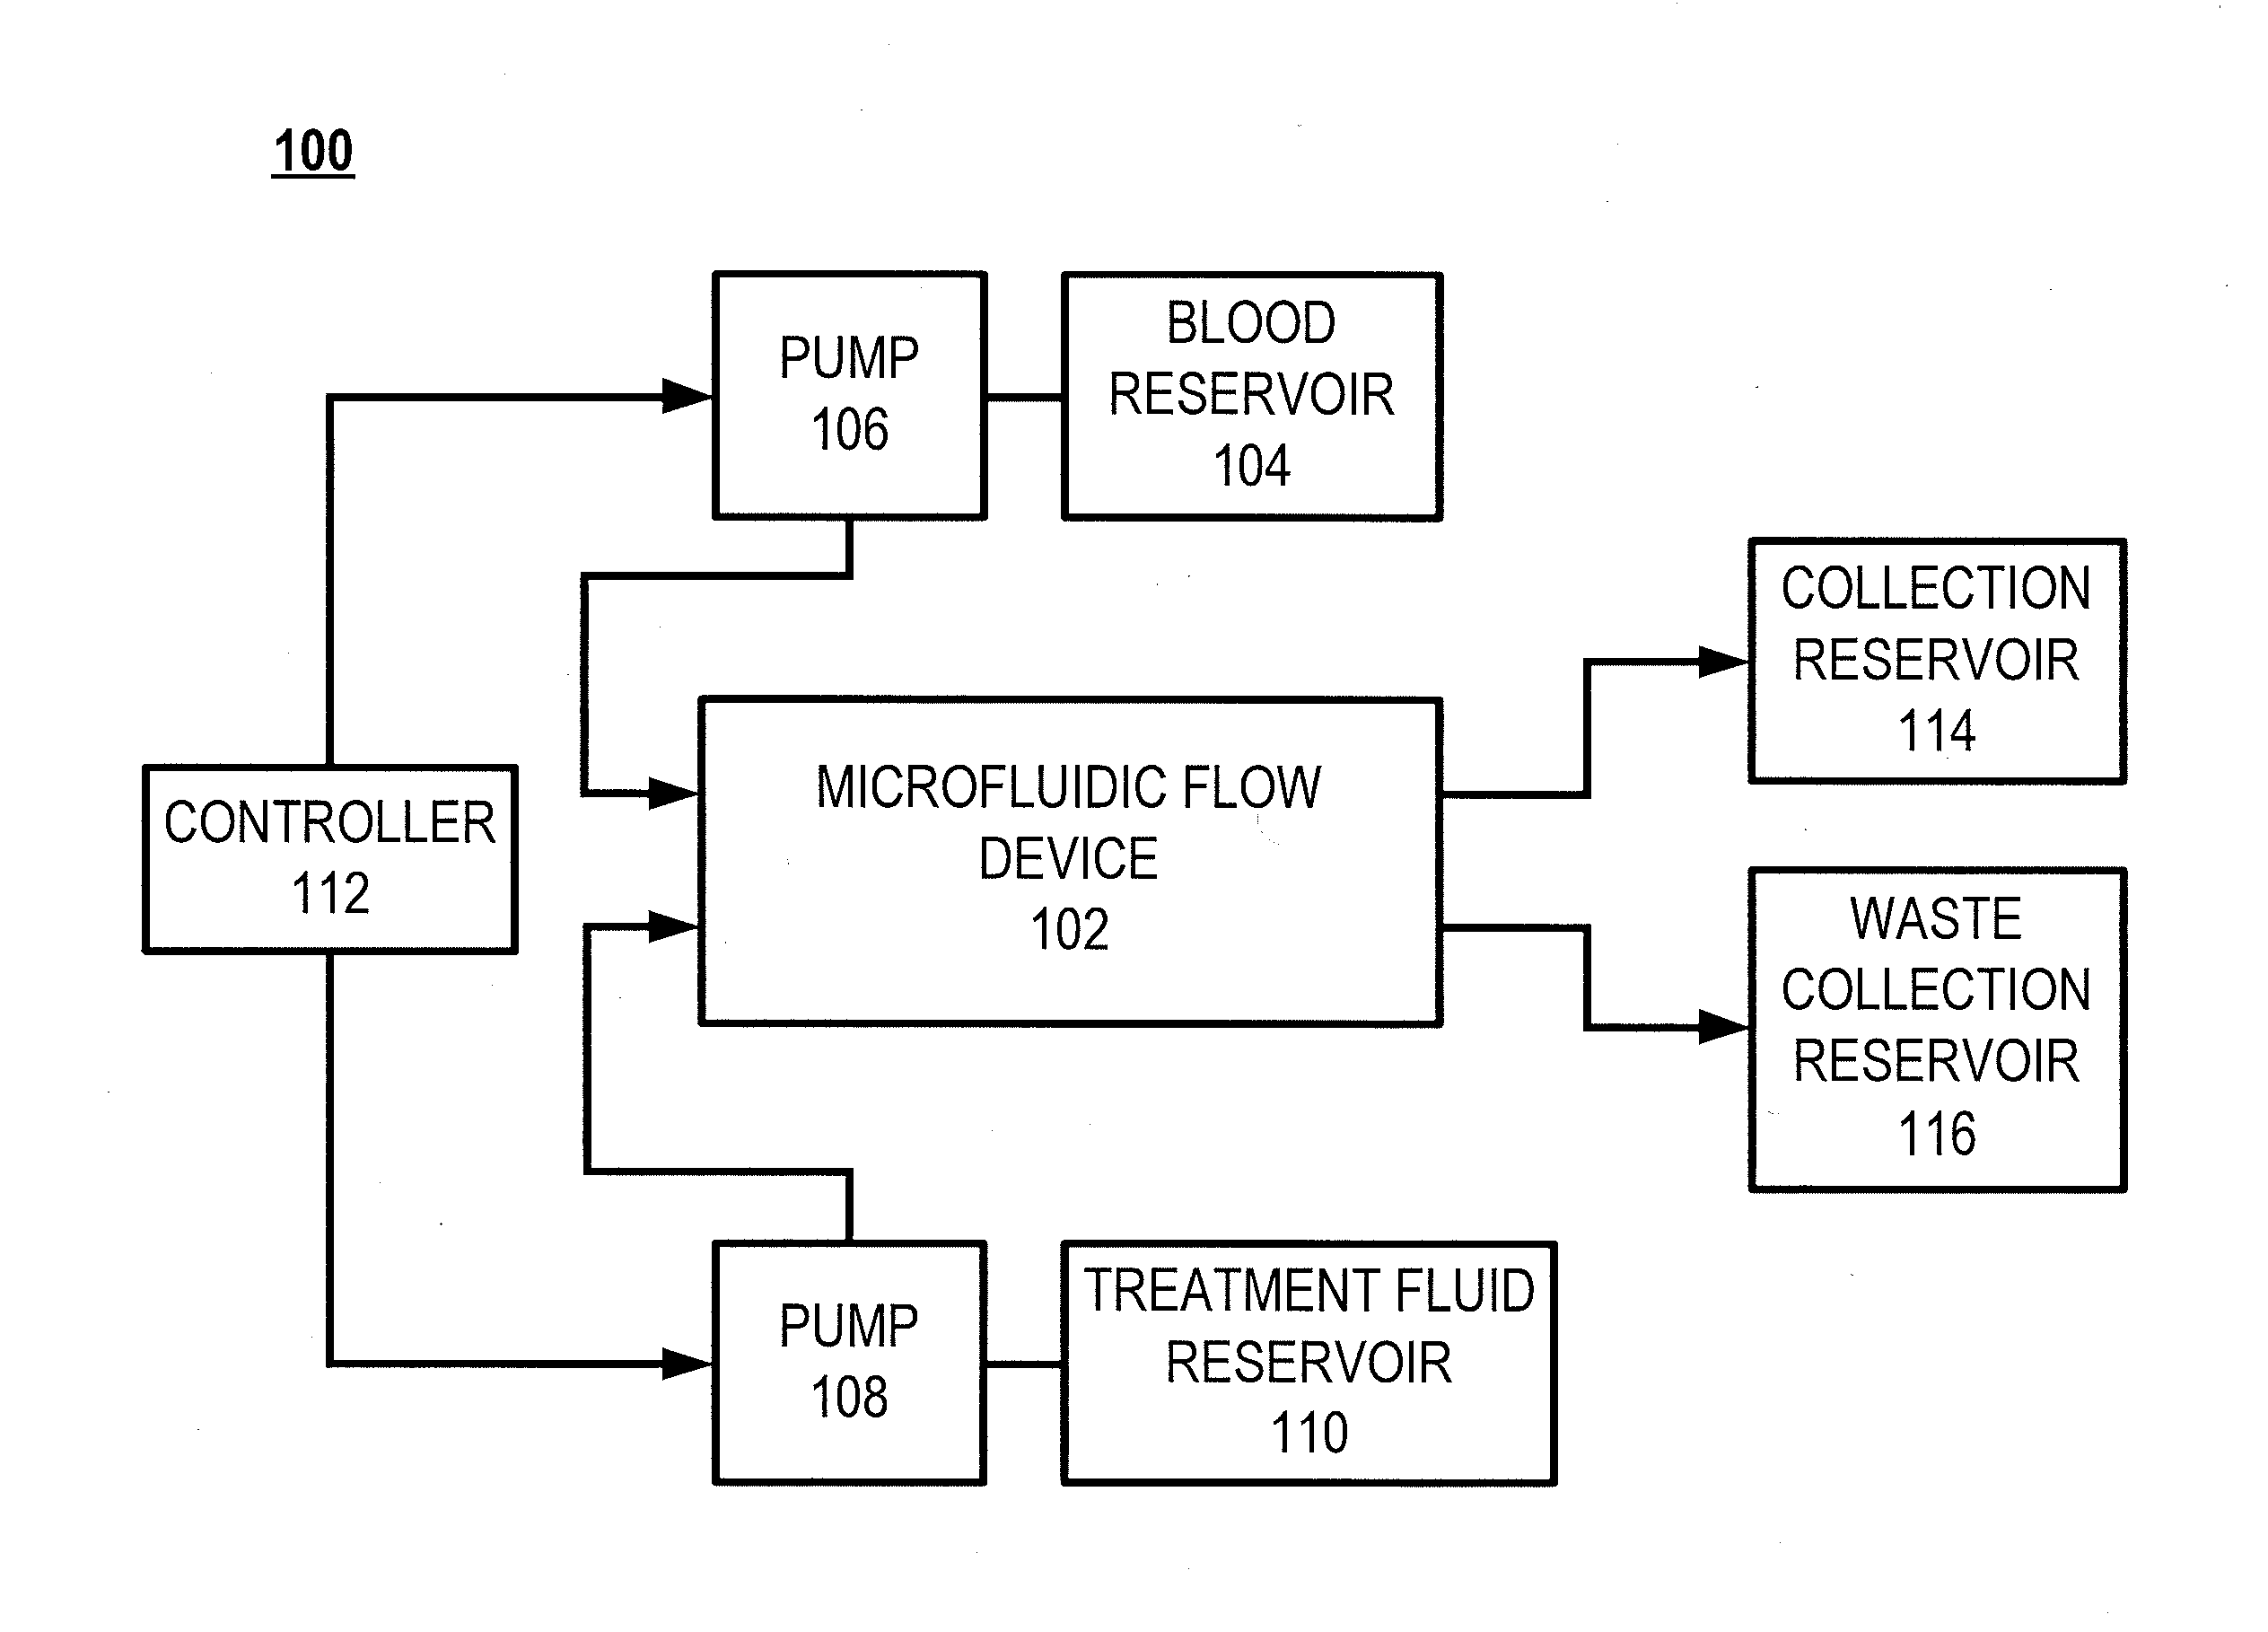 Microfluidic organ assist device incorporating boundary layer disrupters